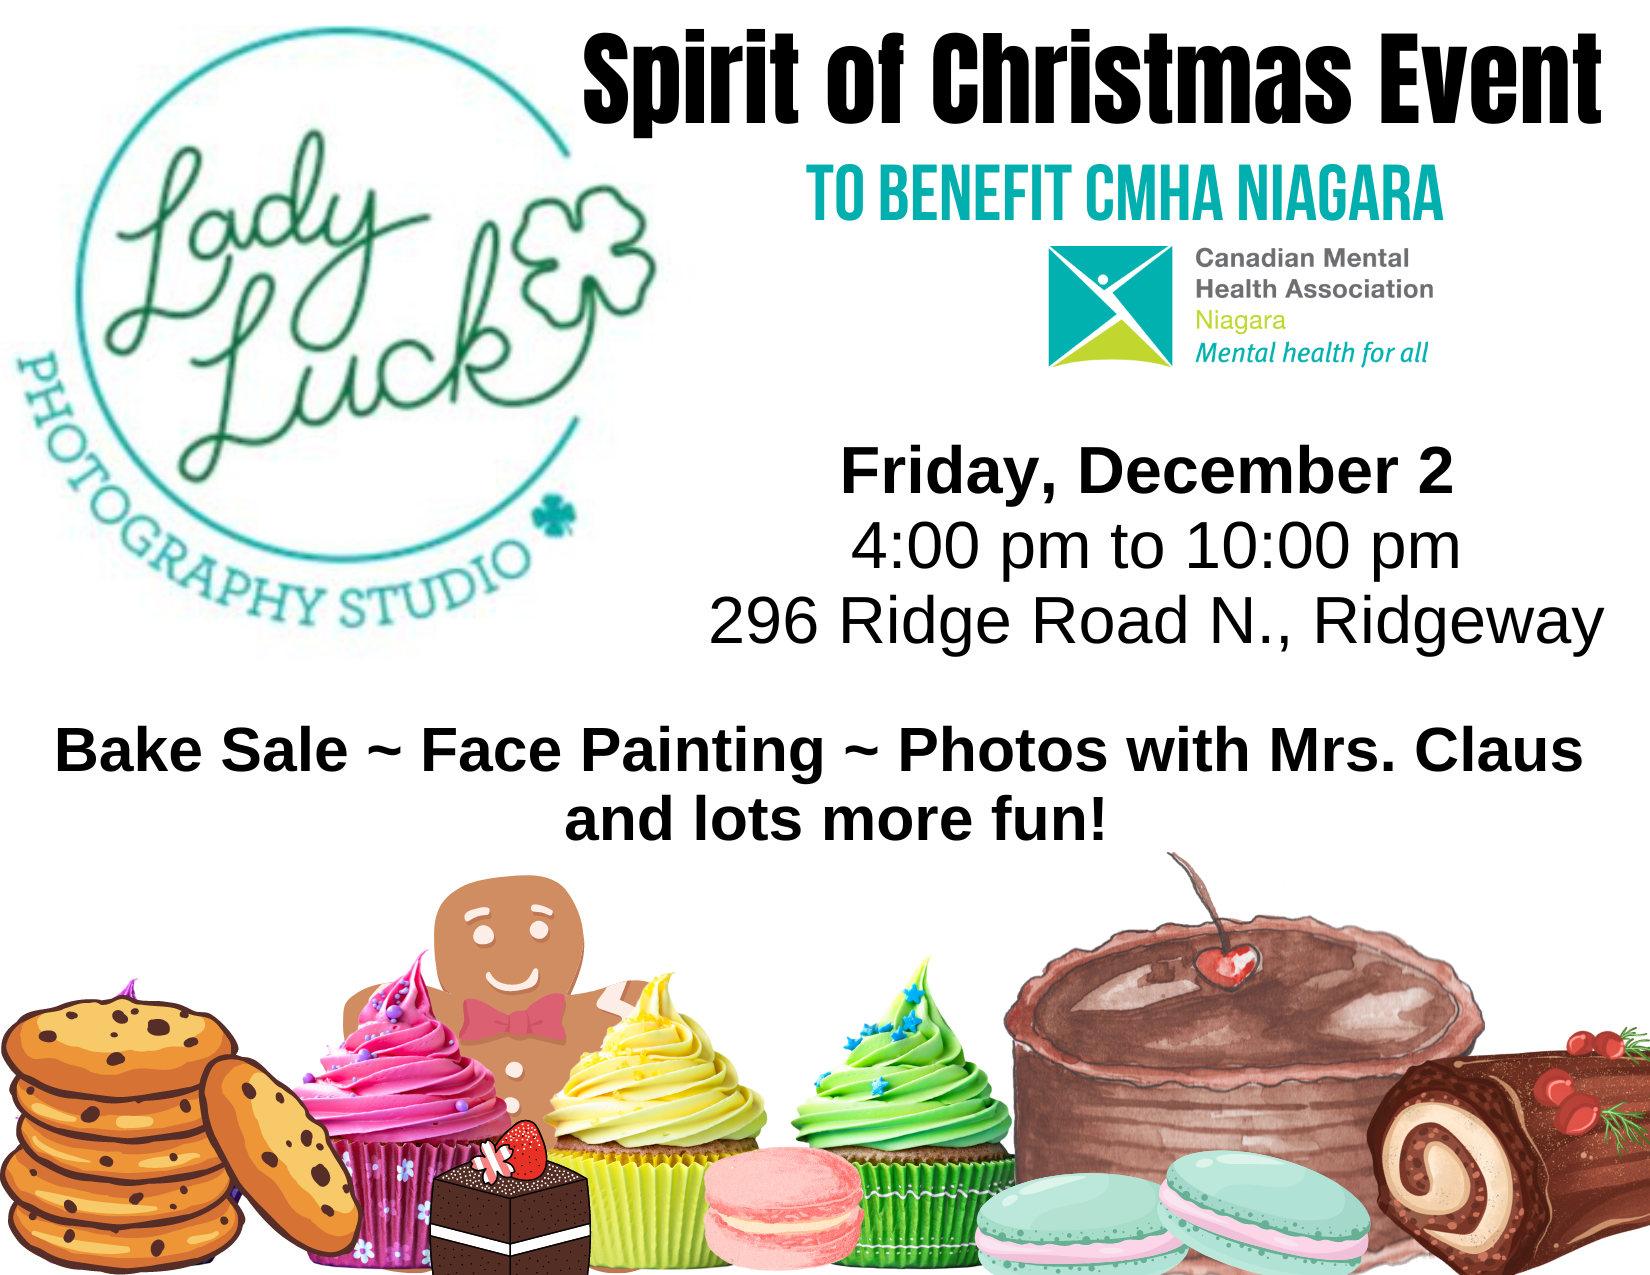 Lady Luck Photo logo and photo of baked goods in ad promoting Spirit of Christmas event on Dec. 2 at 296 Ridge Rd